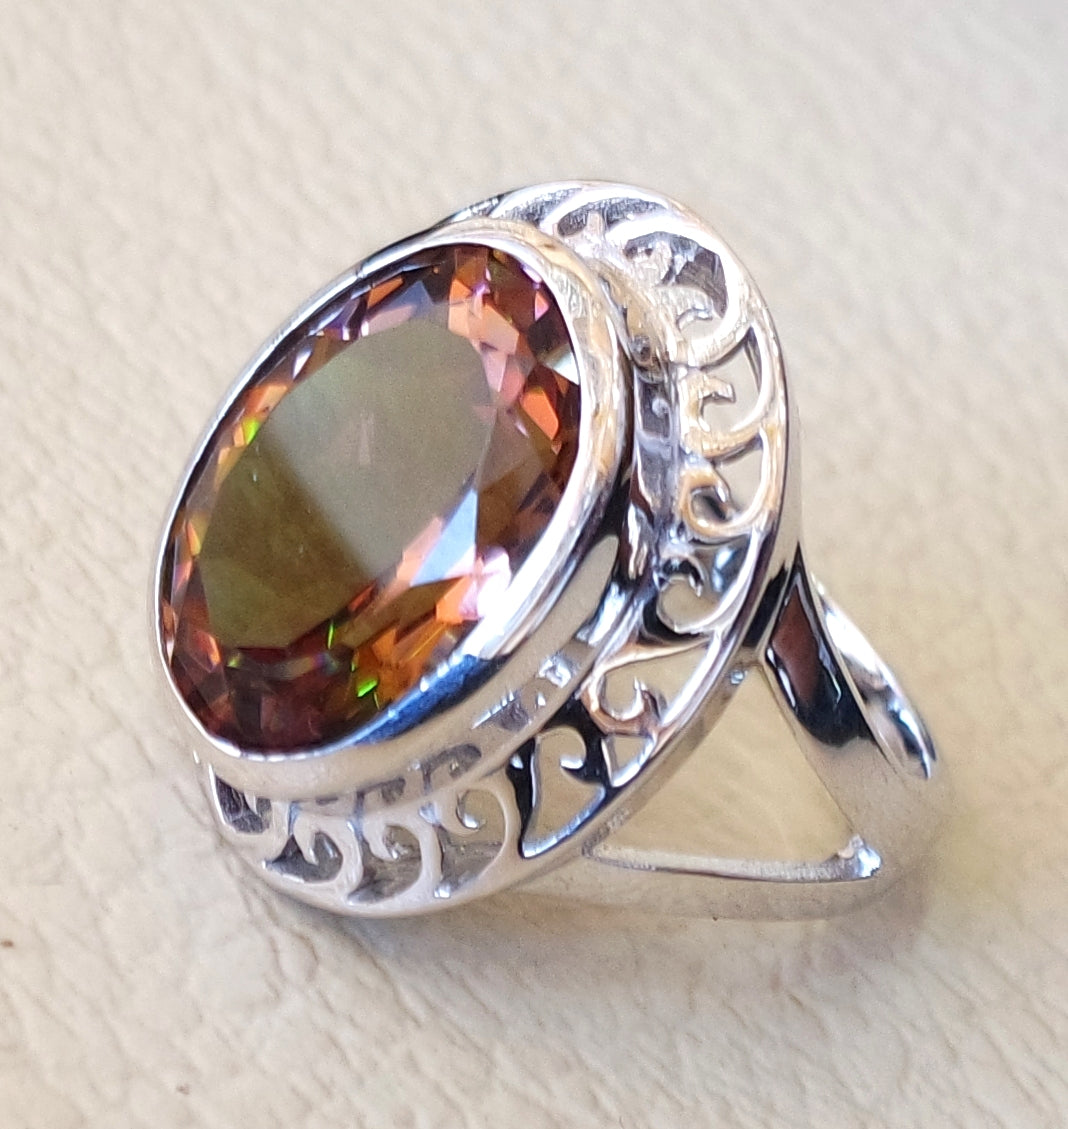 Zultanite oval natural changing color rare gem in sterling silver 925 Diaspore women ring cut stone all sizes